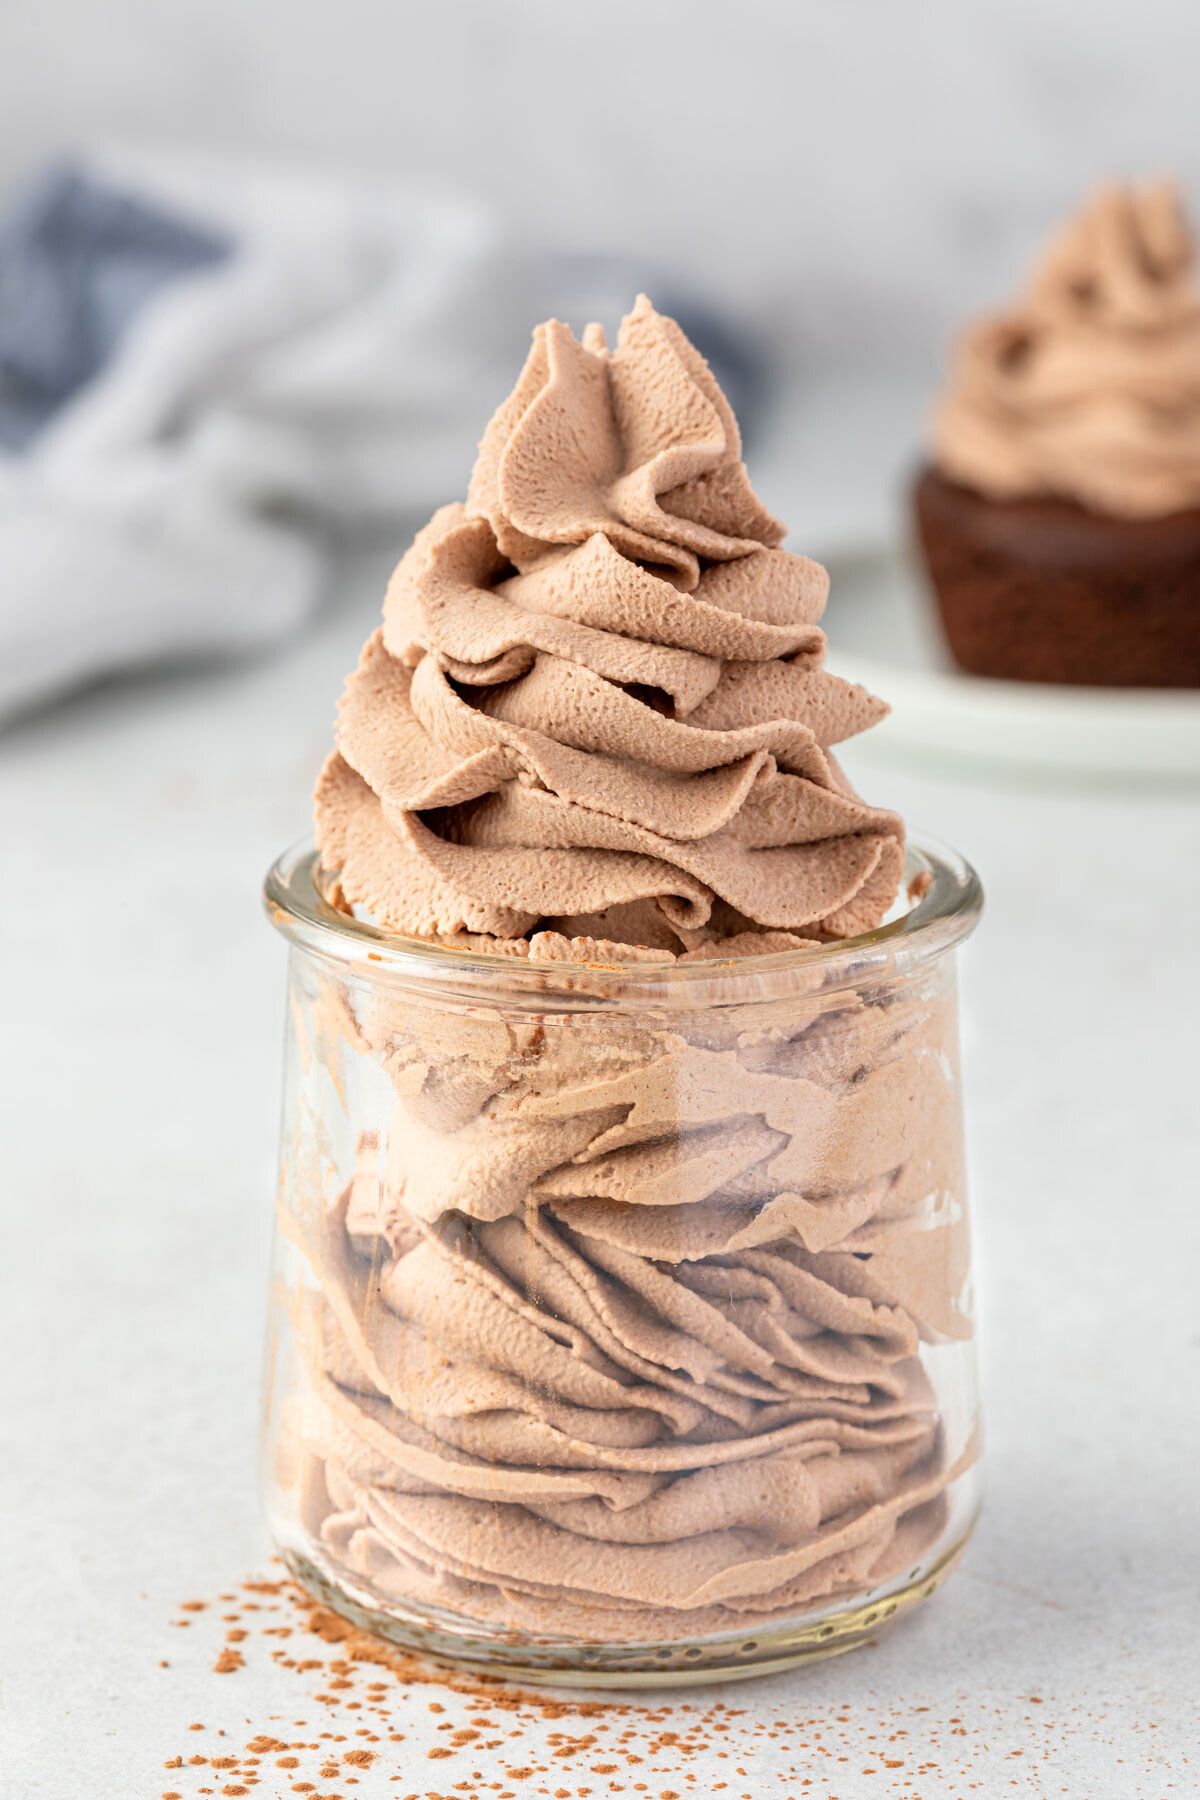 Chocolate whipped cream piped inside a glass jar, with swirls peaking into a point out of the jar.